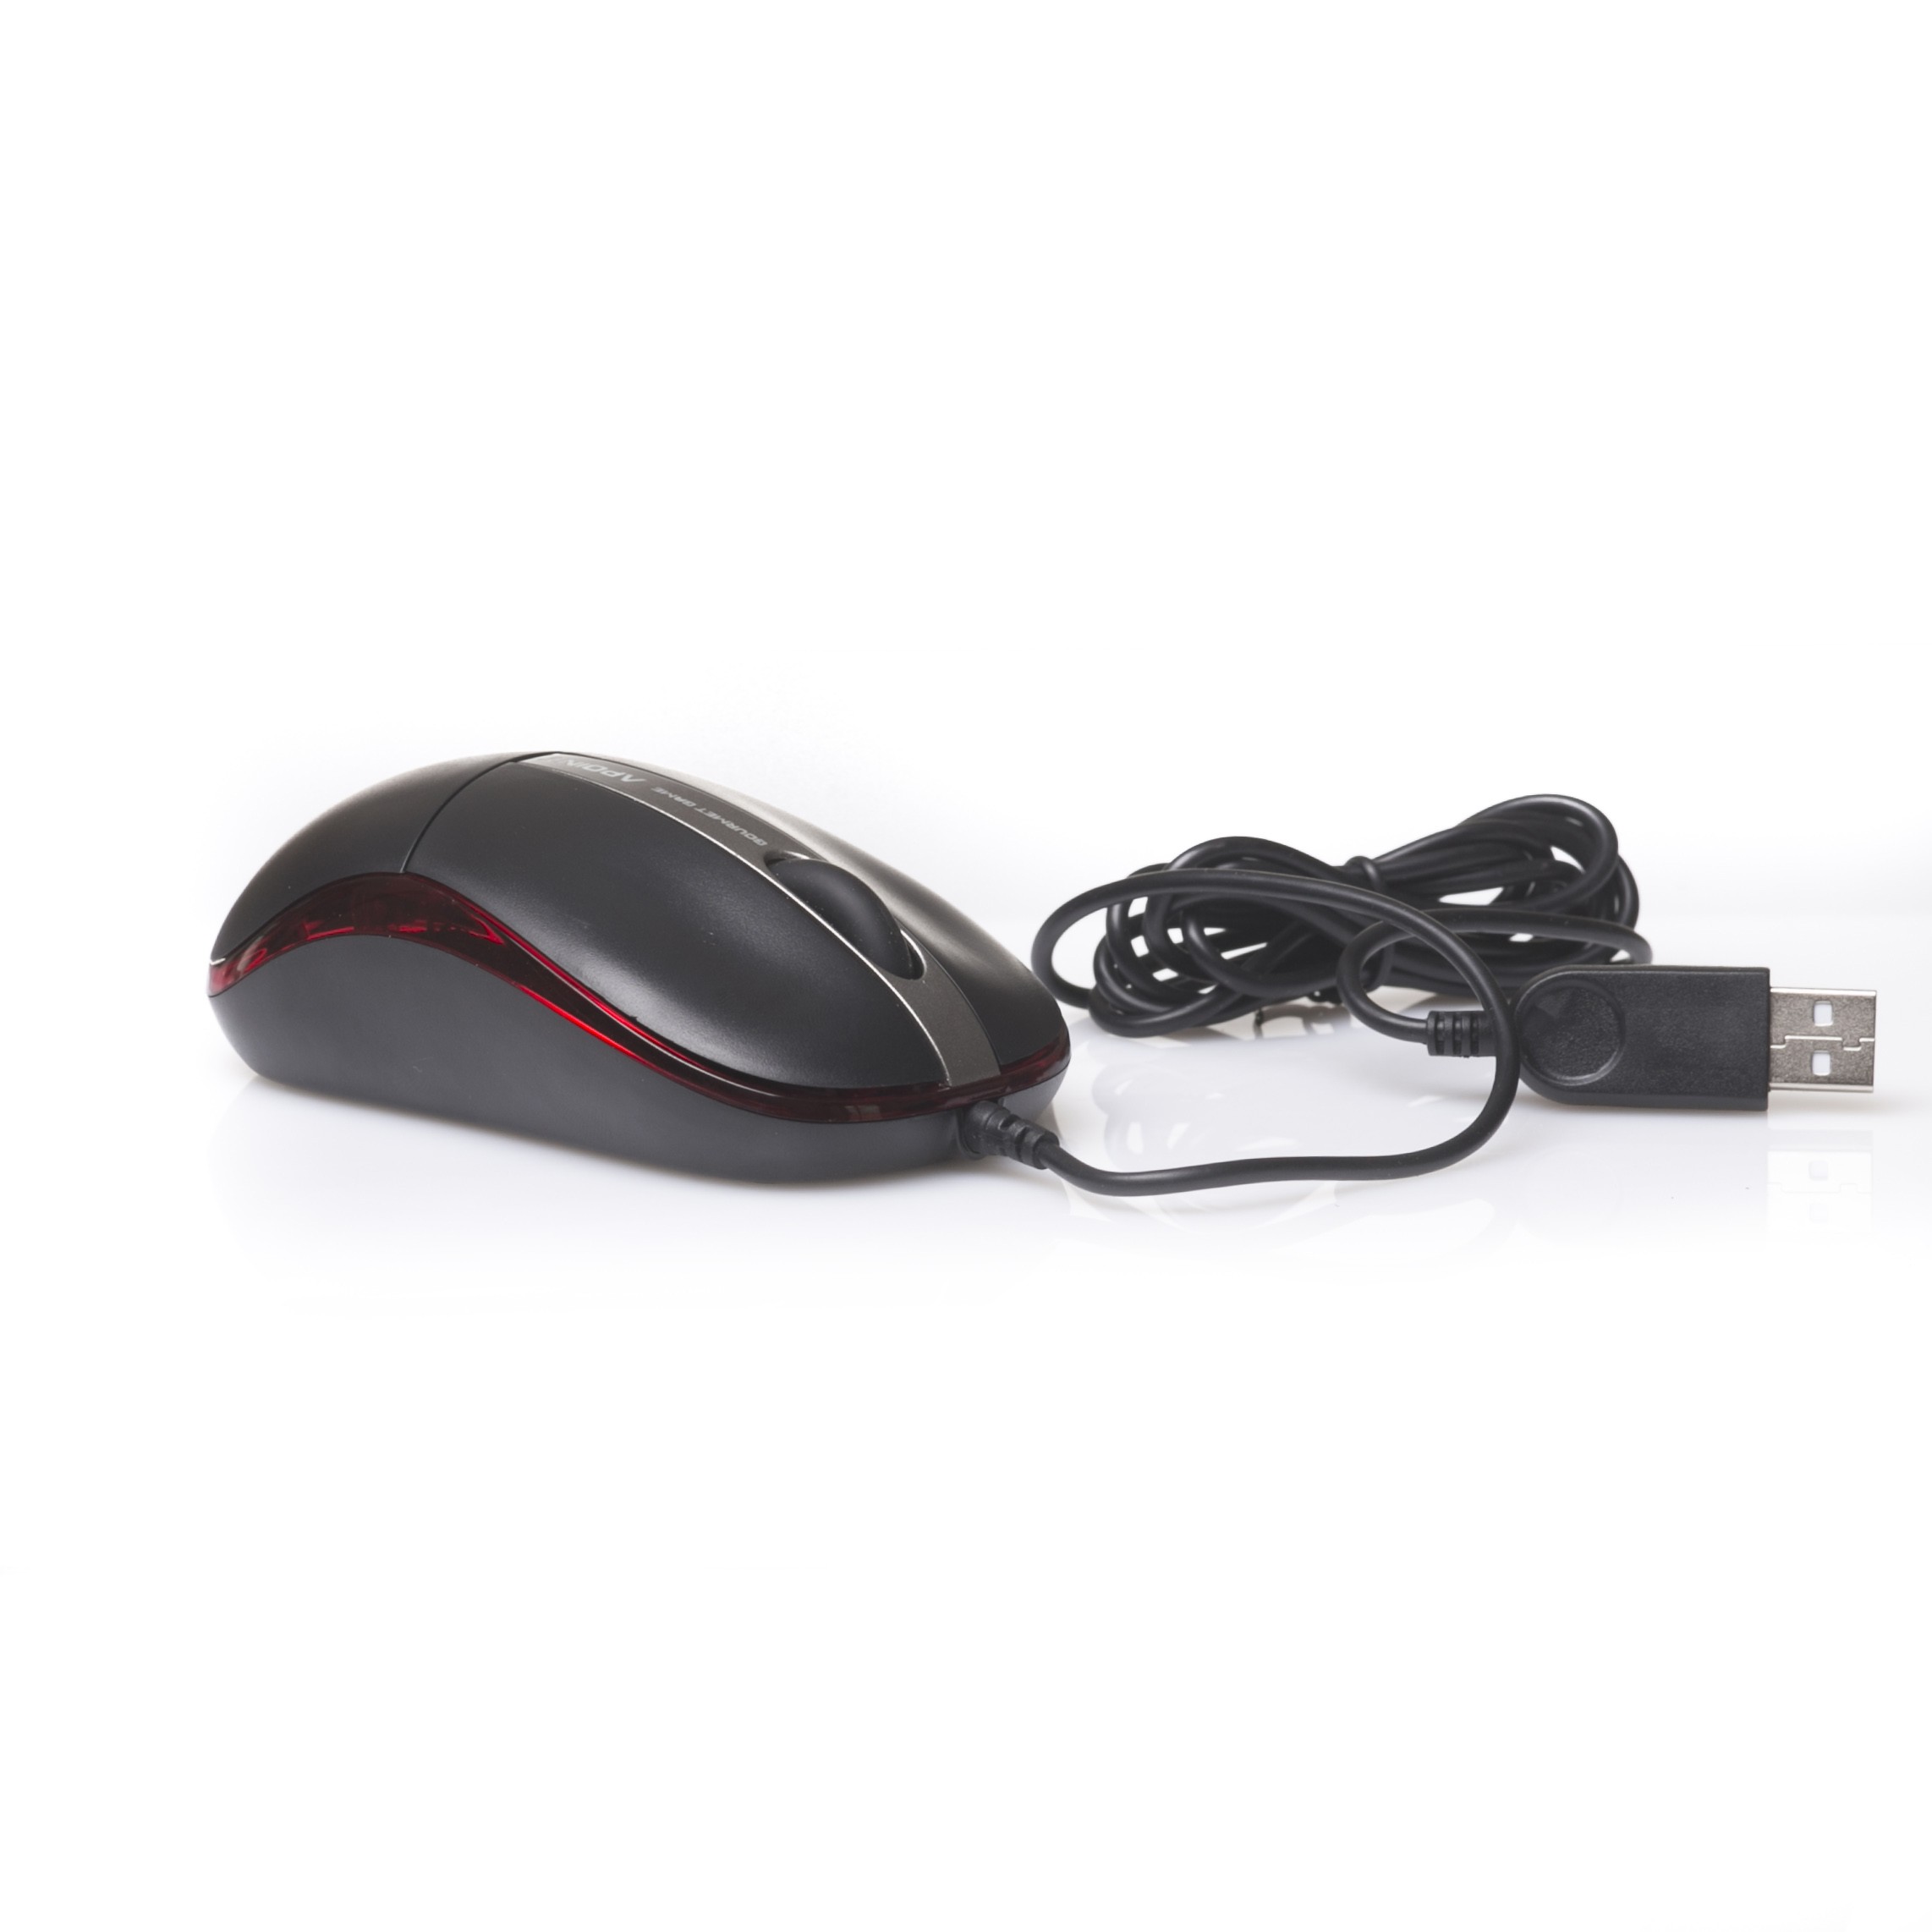 Mouse USB GSM